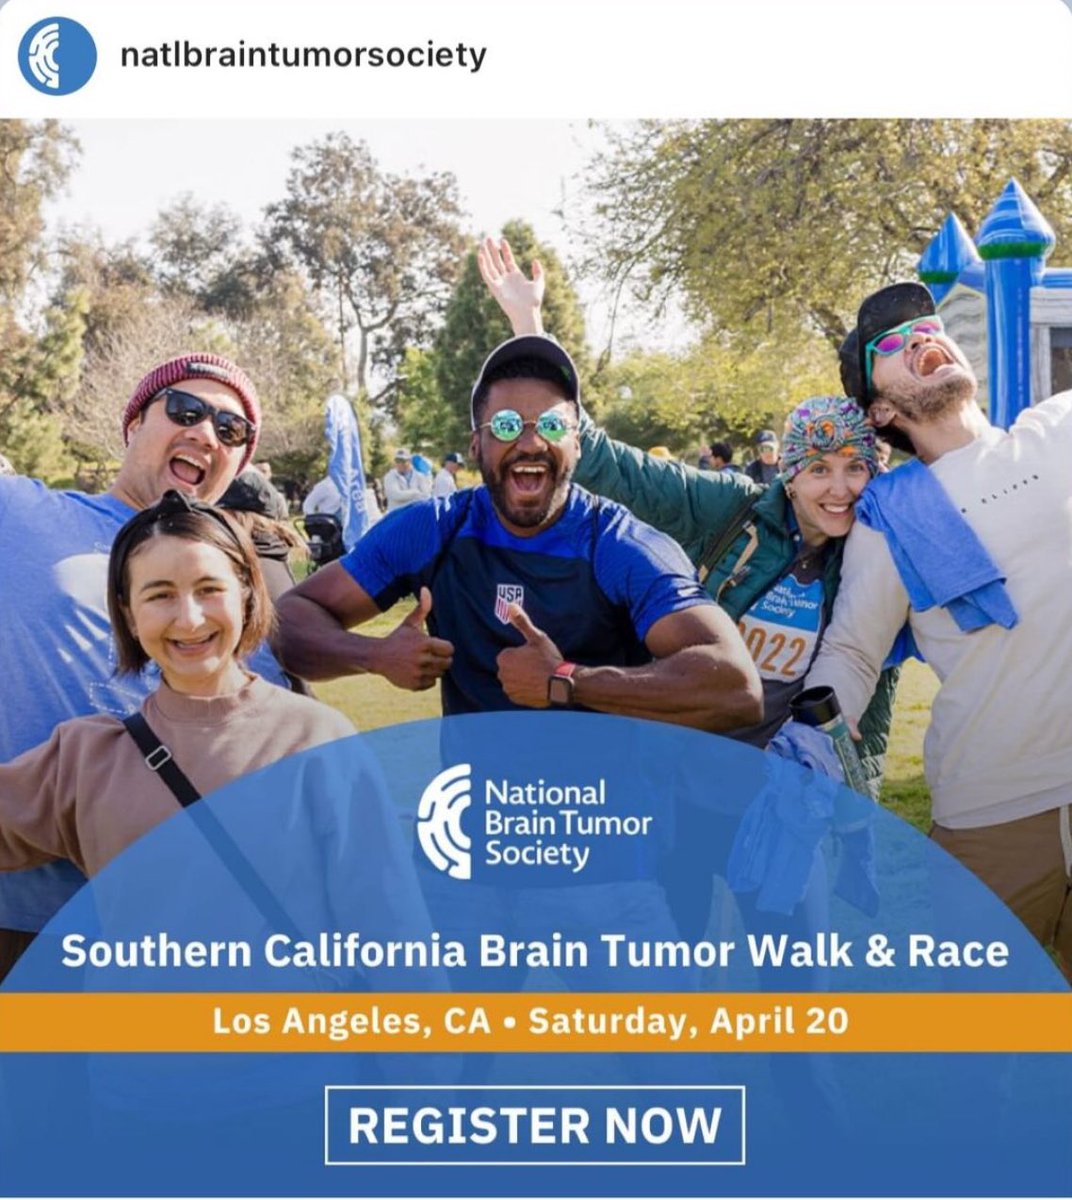 There is still time to register and join our team tomorrow at the @NBTStweets So. Cal Brain Tumor Walk and Race bit.ly/3J2JXxm This community event, races awareness and funds to support the needs of brain tumor patients and their families. Together, let's help find a